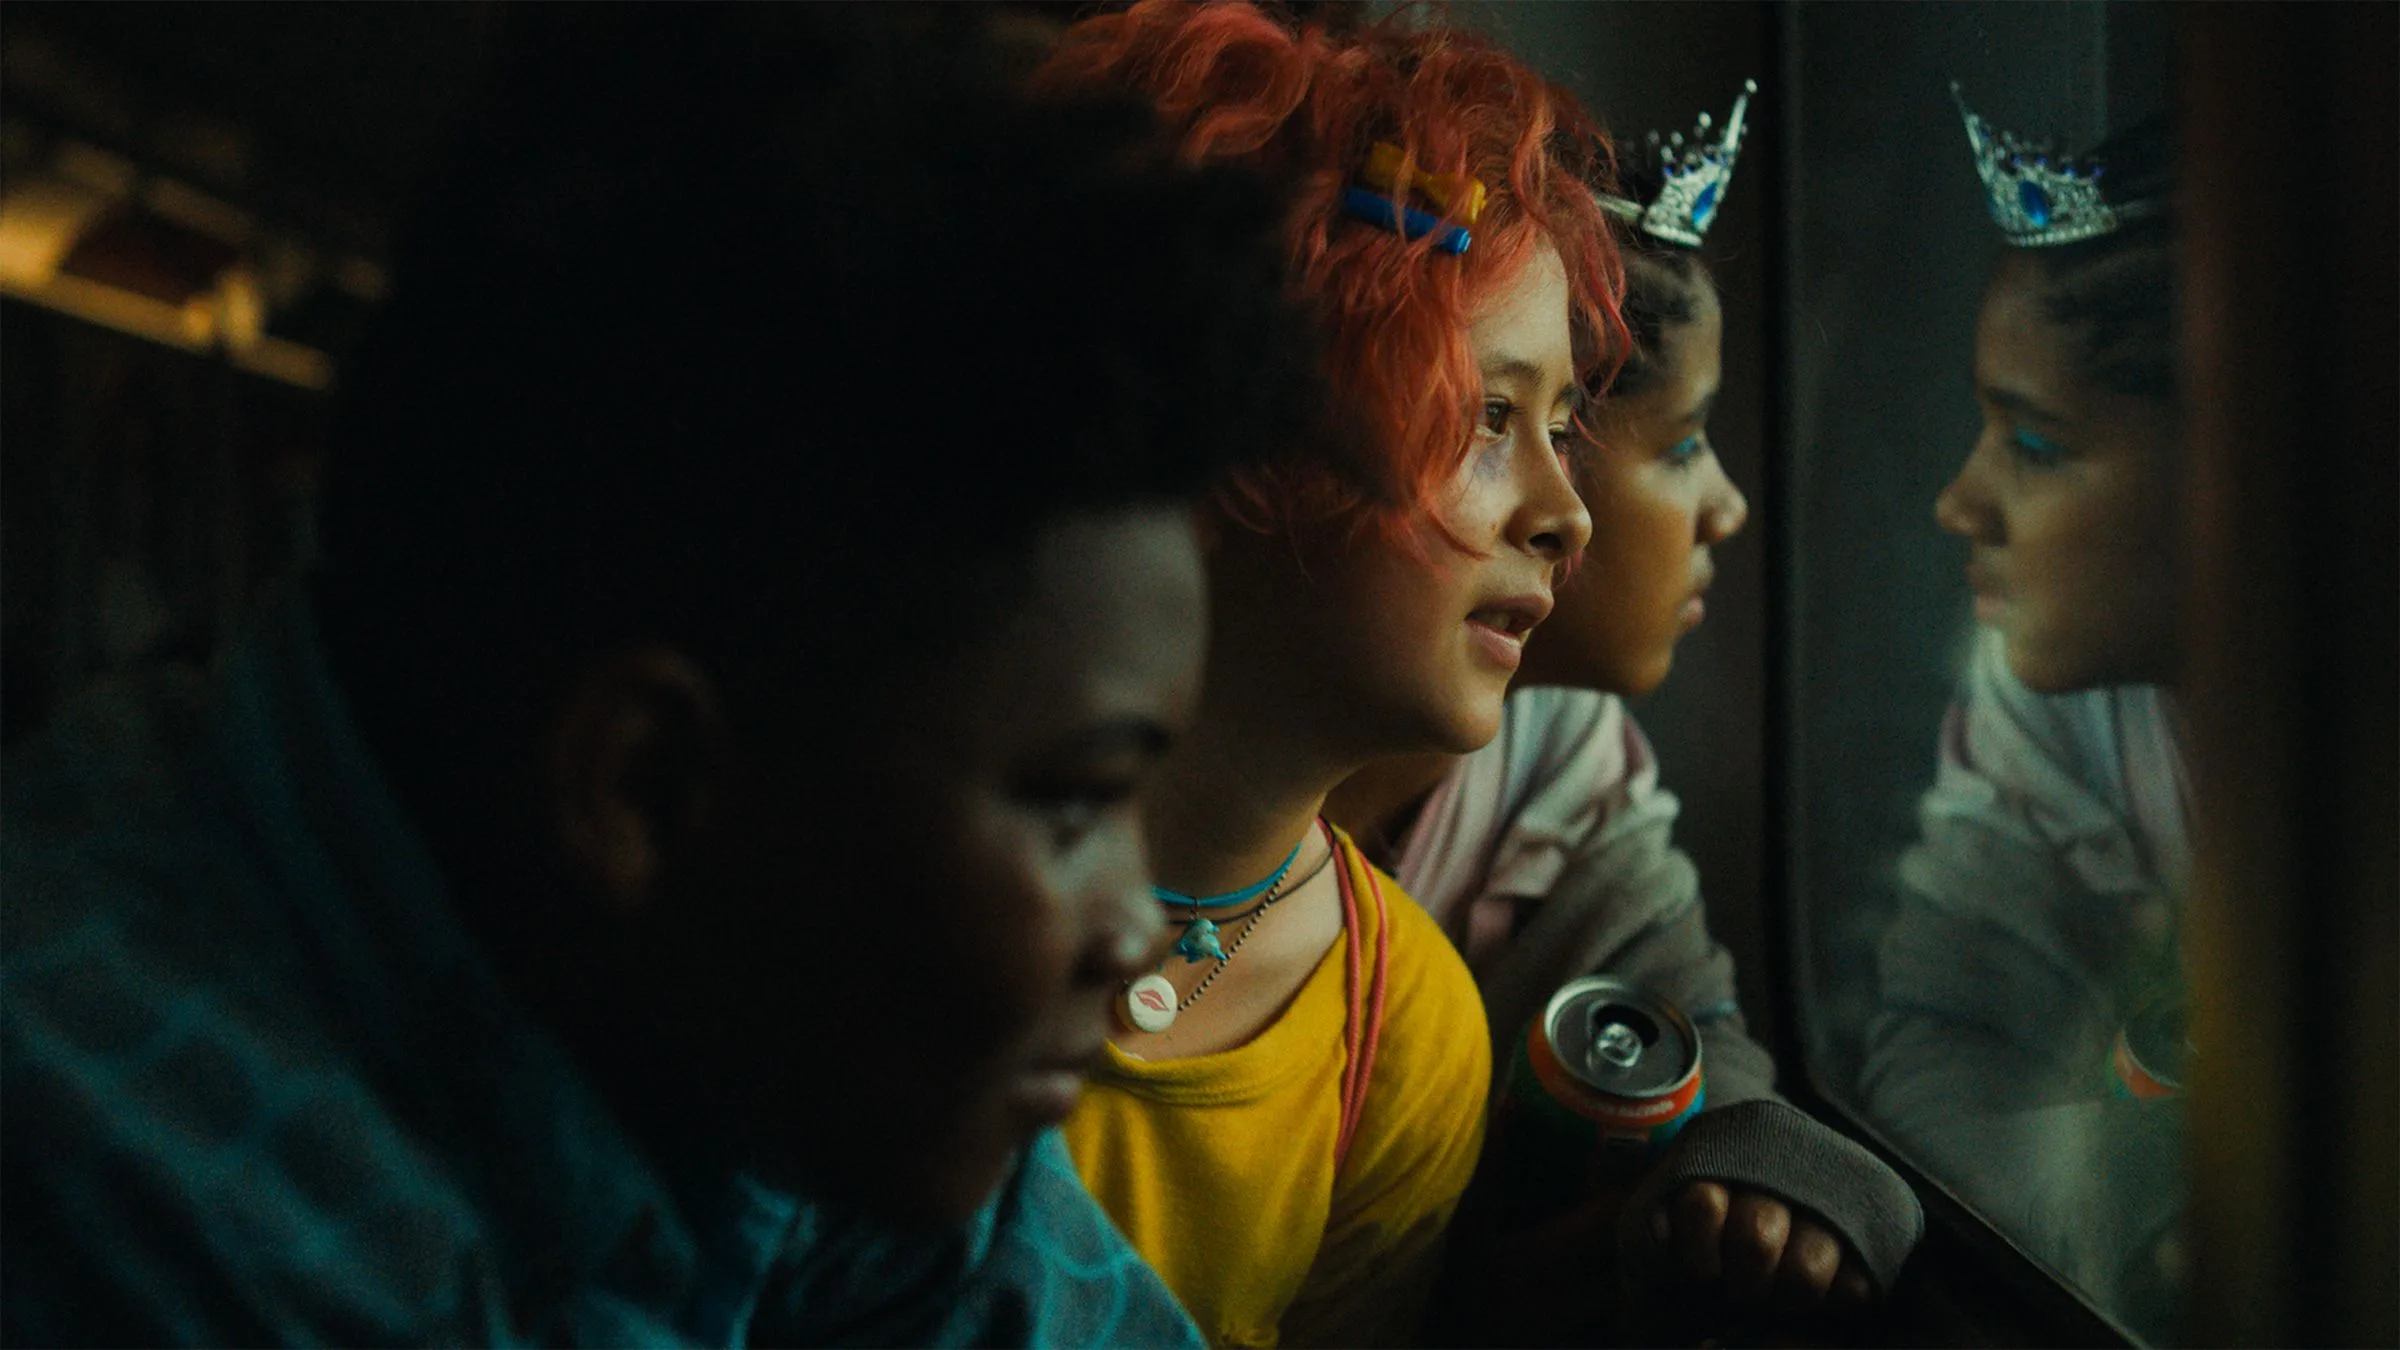 A still from the feature "Short." Three children look at something through glass